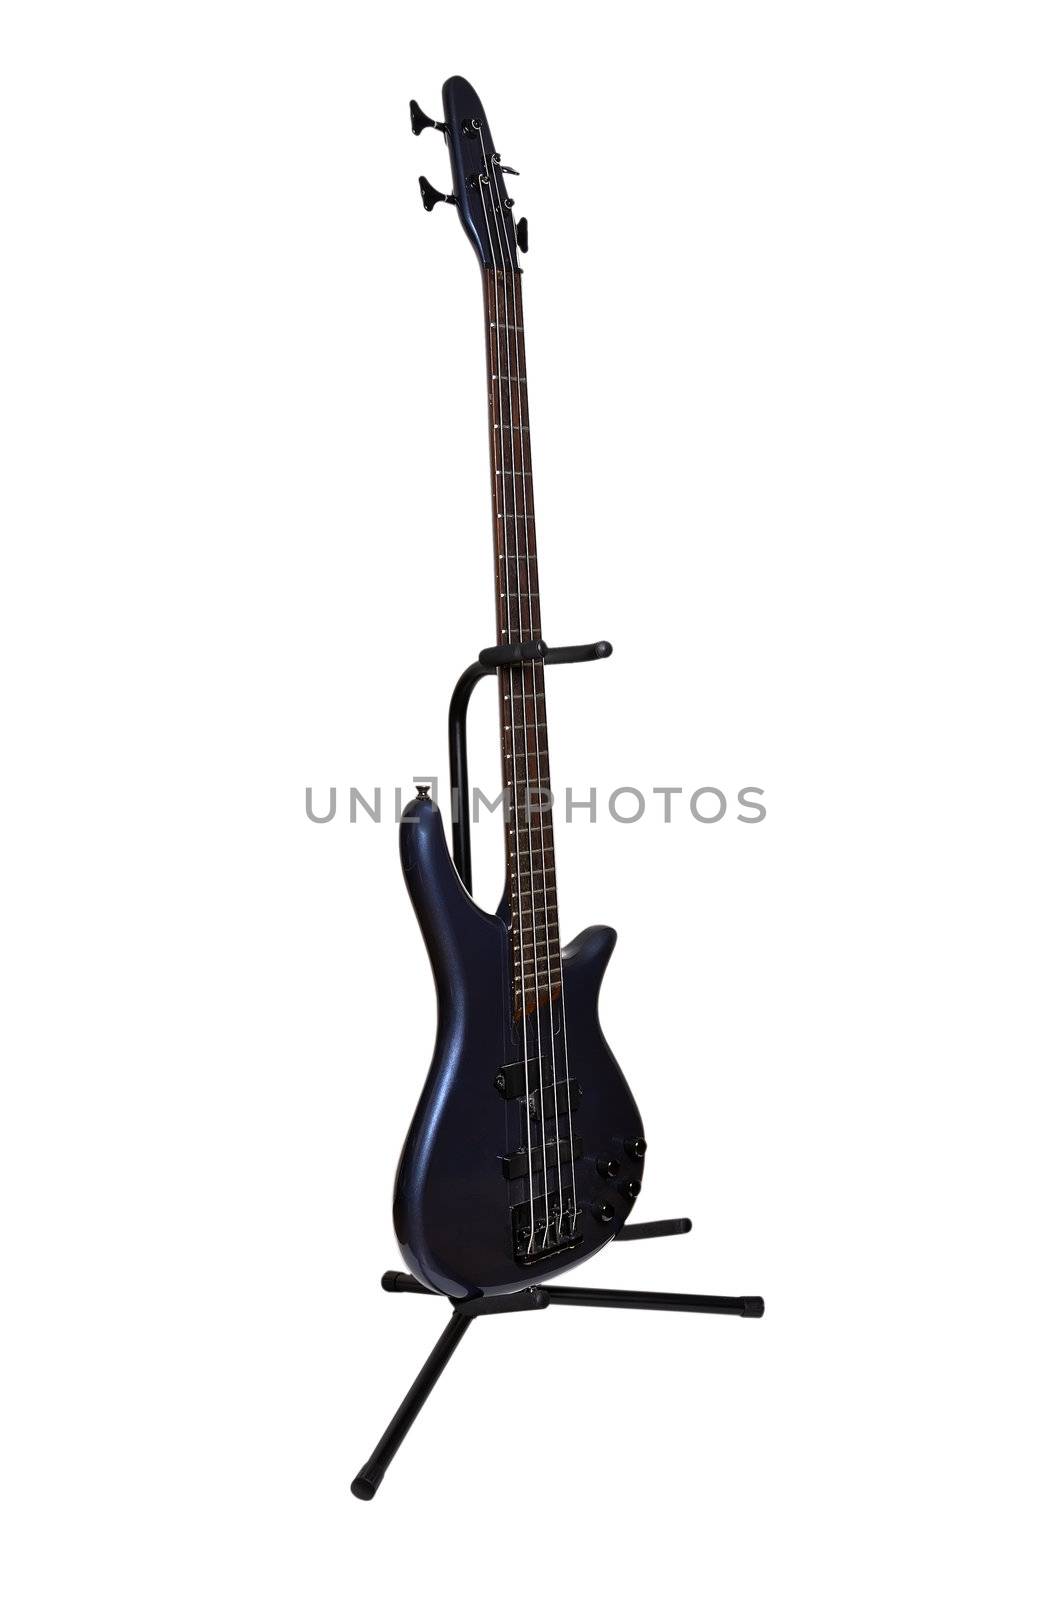 bass guitar on stand on a white background